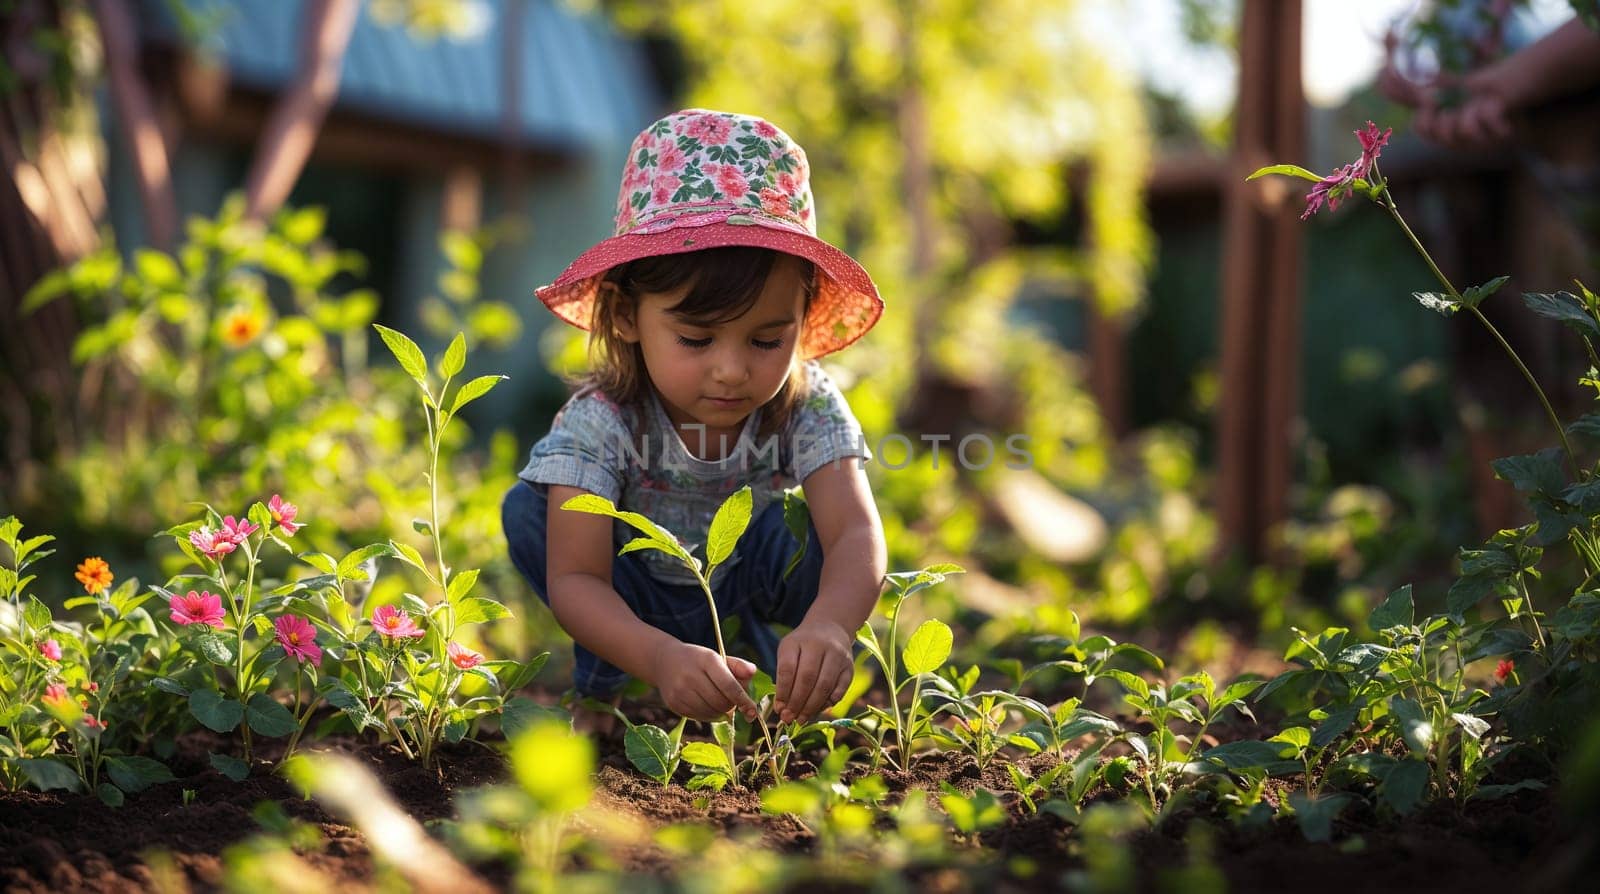 A focused young girl is kneeling down in a sunlit garden, carefully tending to small green plants. She is wearing a colorful sun hat with a blurred background - Generative AI